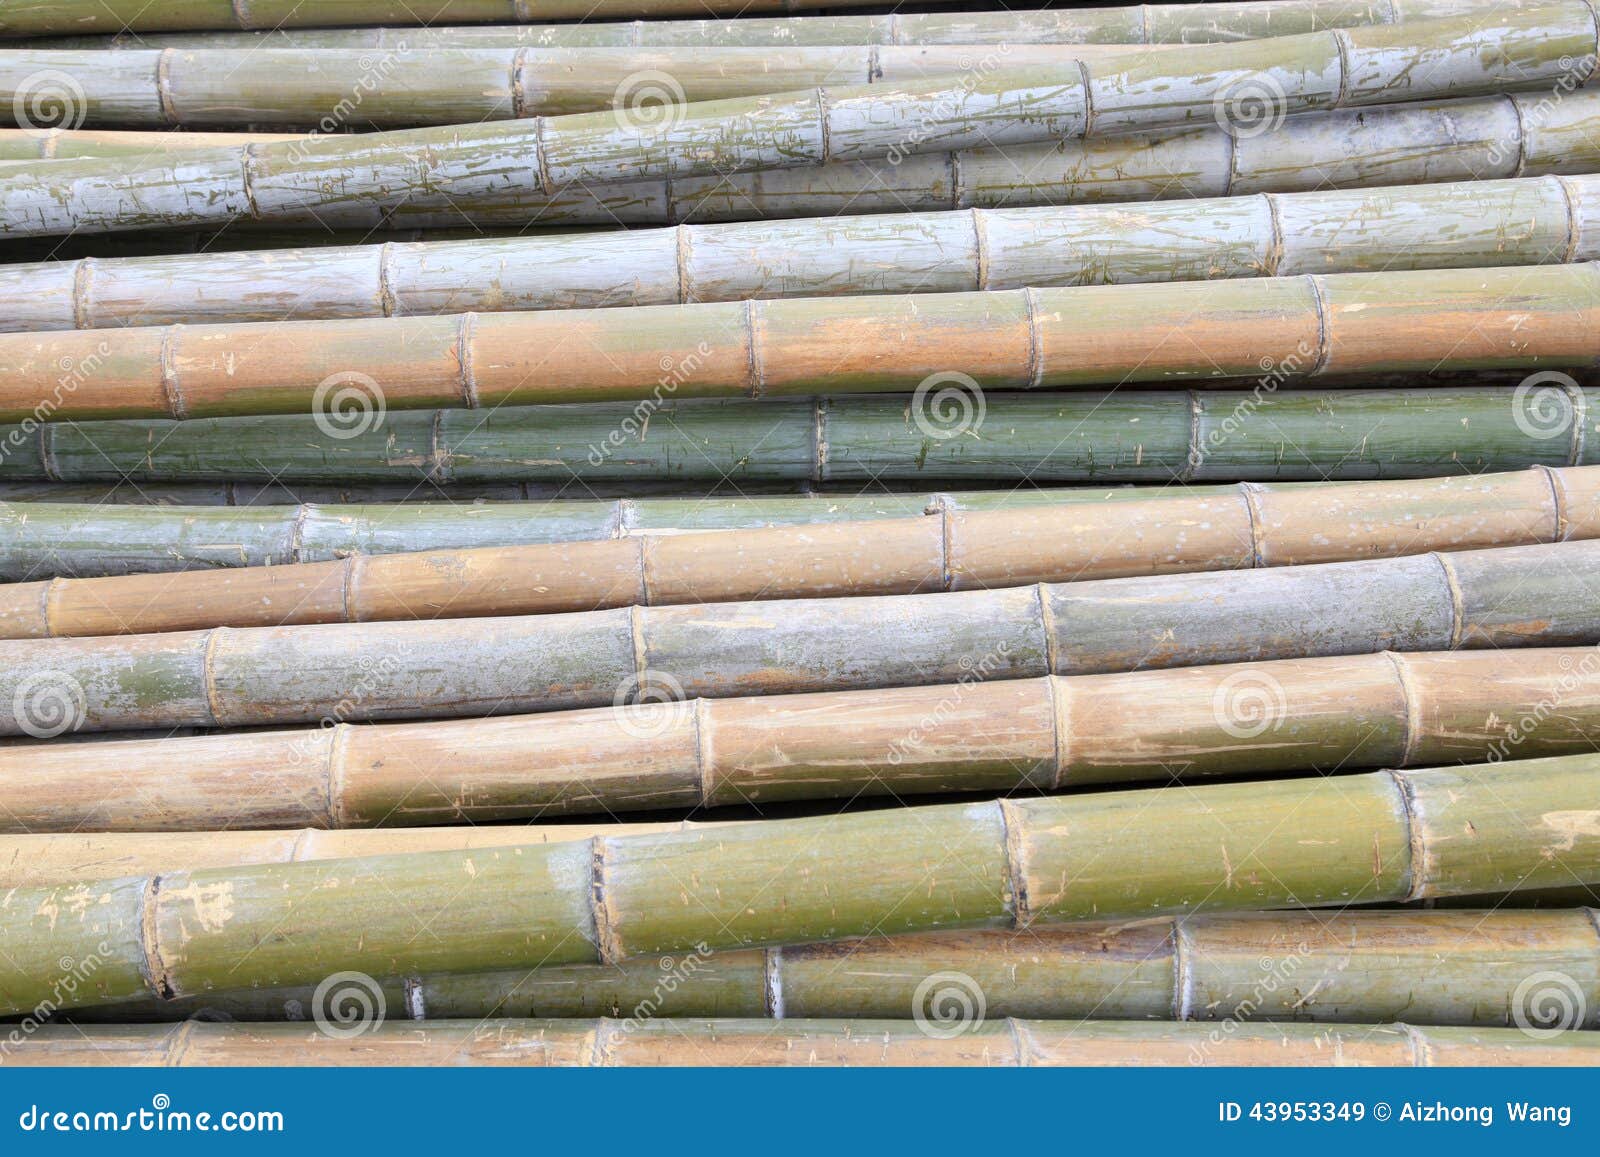 neatly stacked the bamboo pole